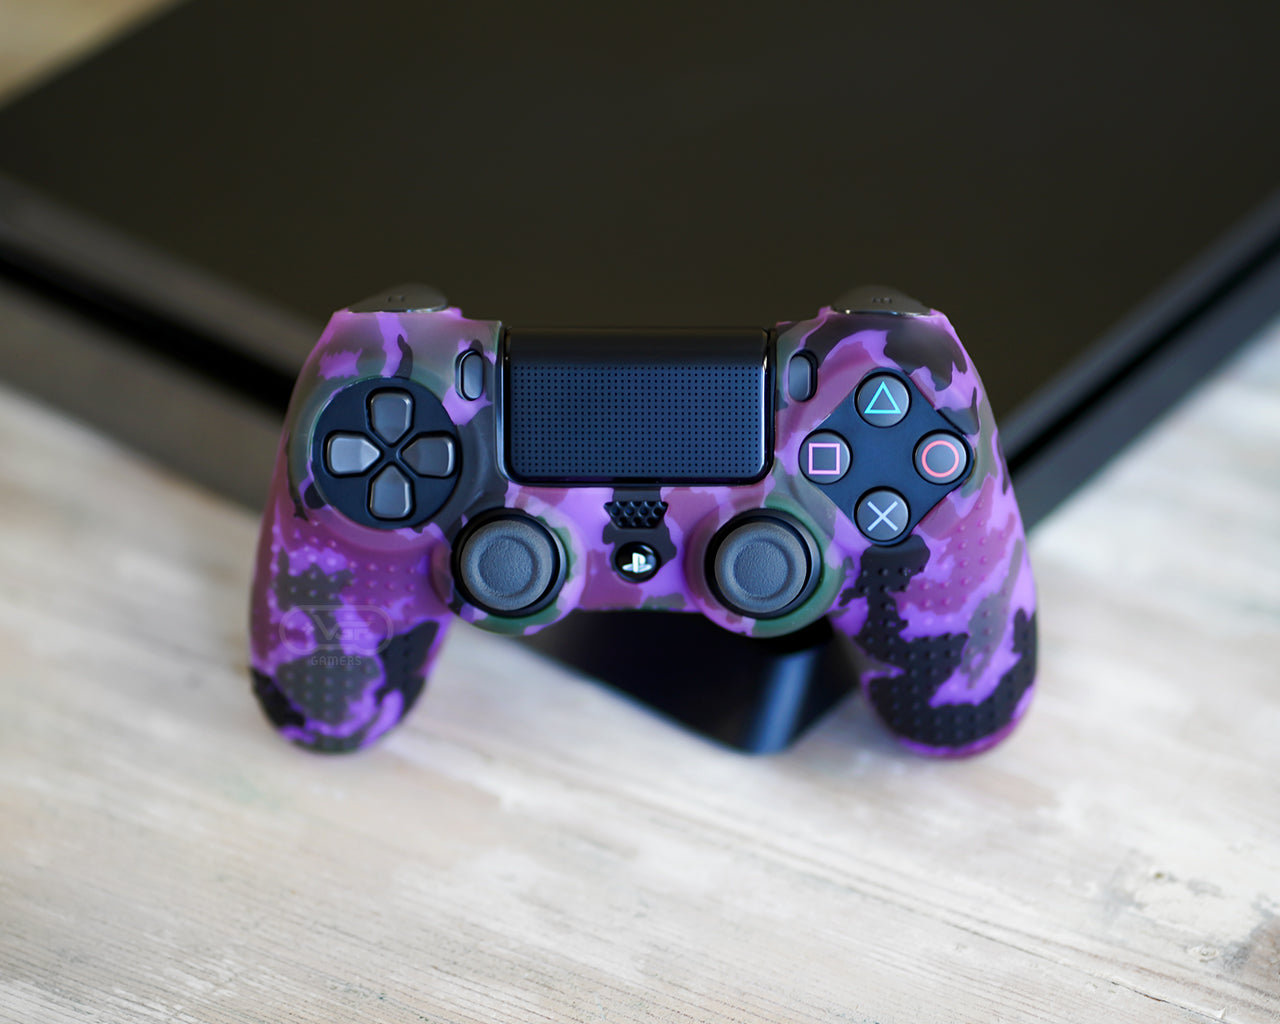 ps4 controller purple and blue